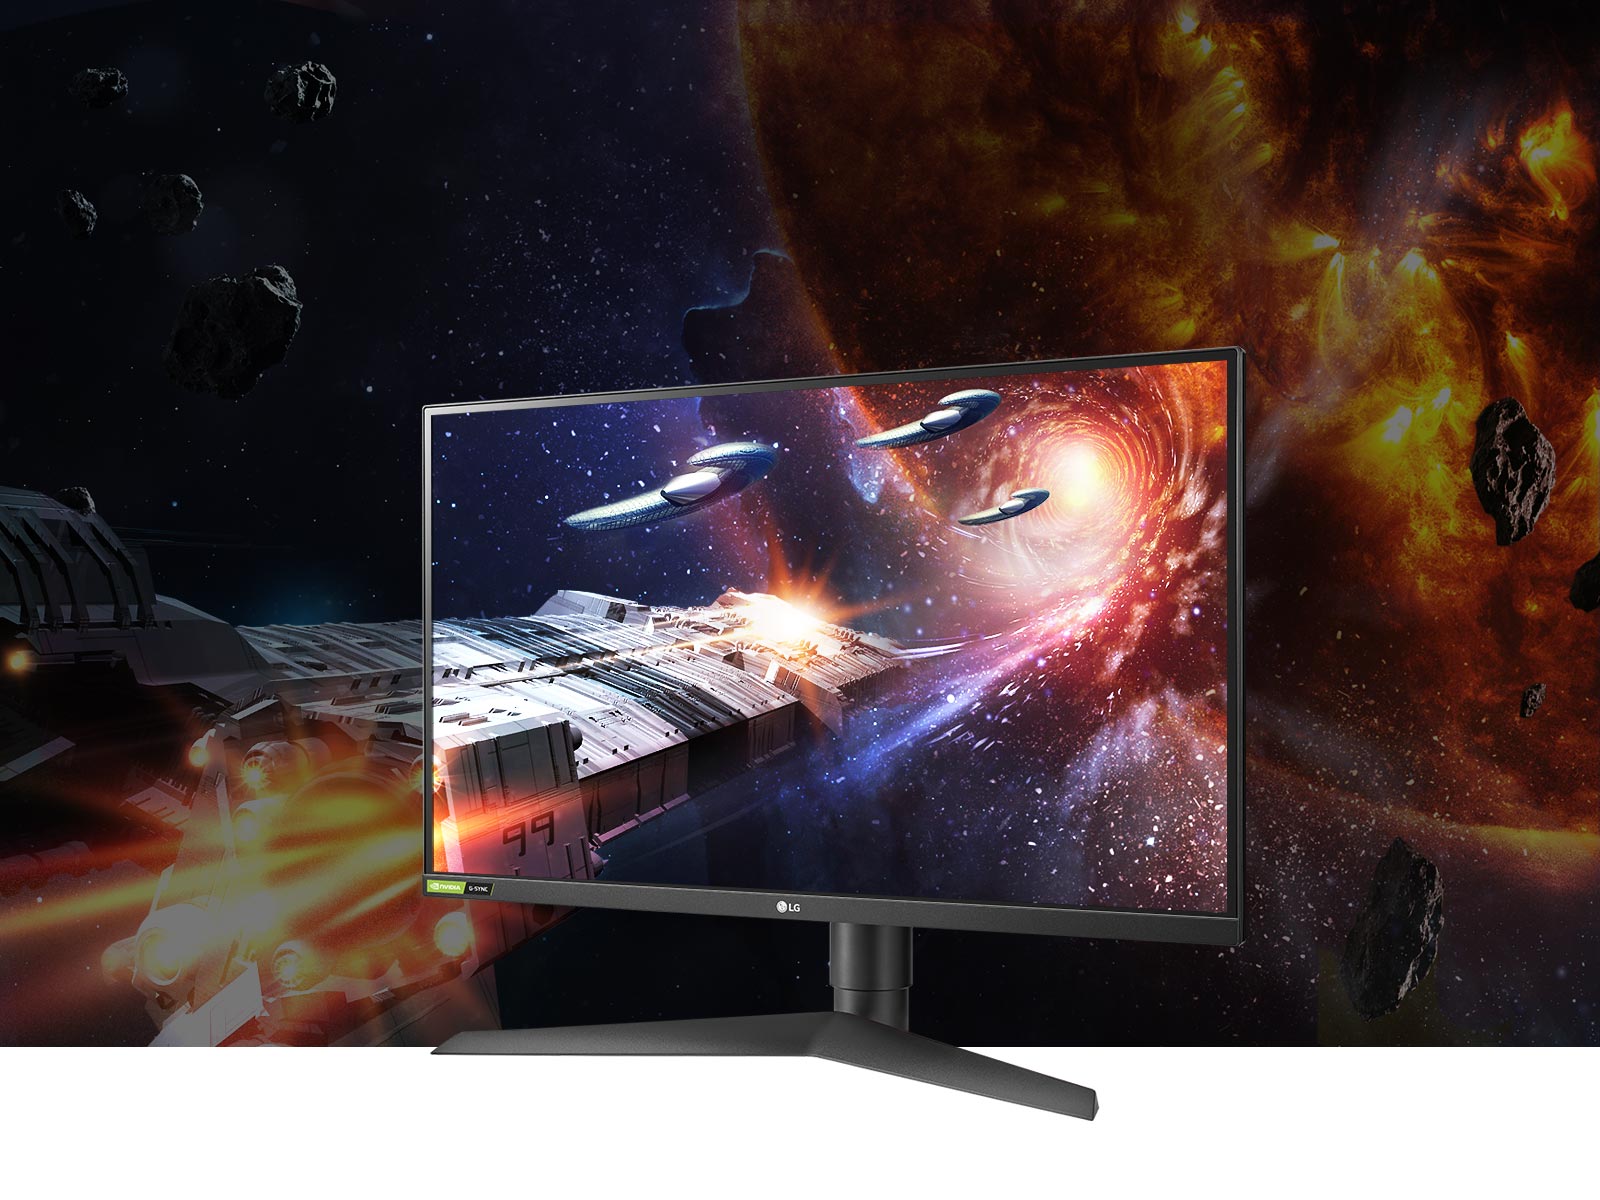 hdr10 monitor providing users with an experience of realistic visual immersion